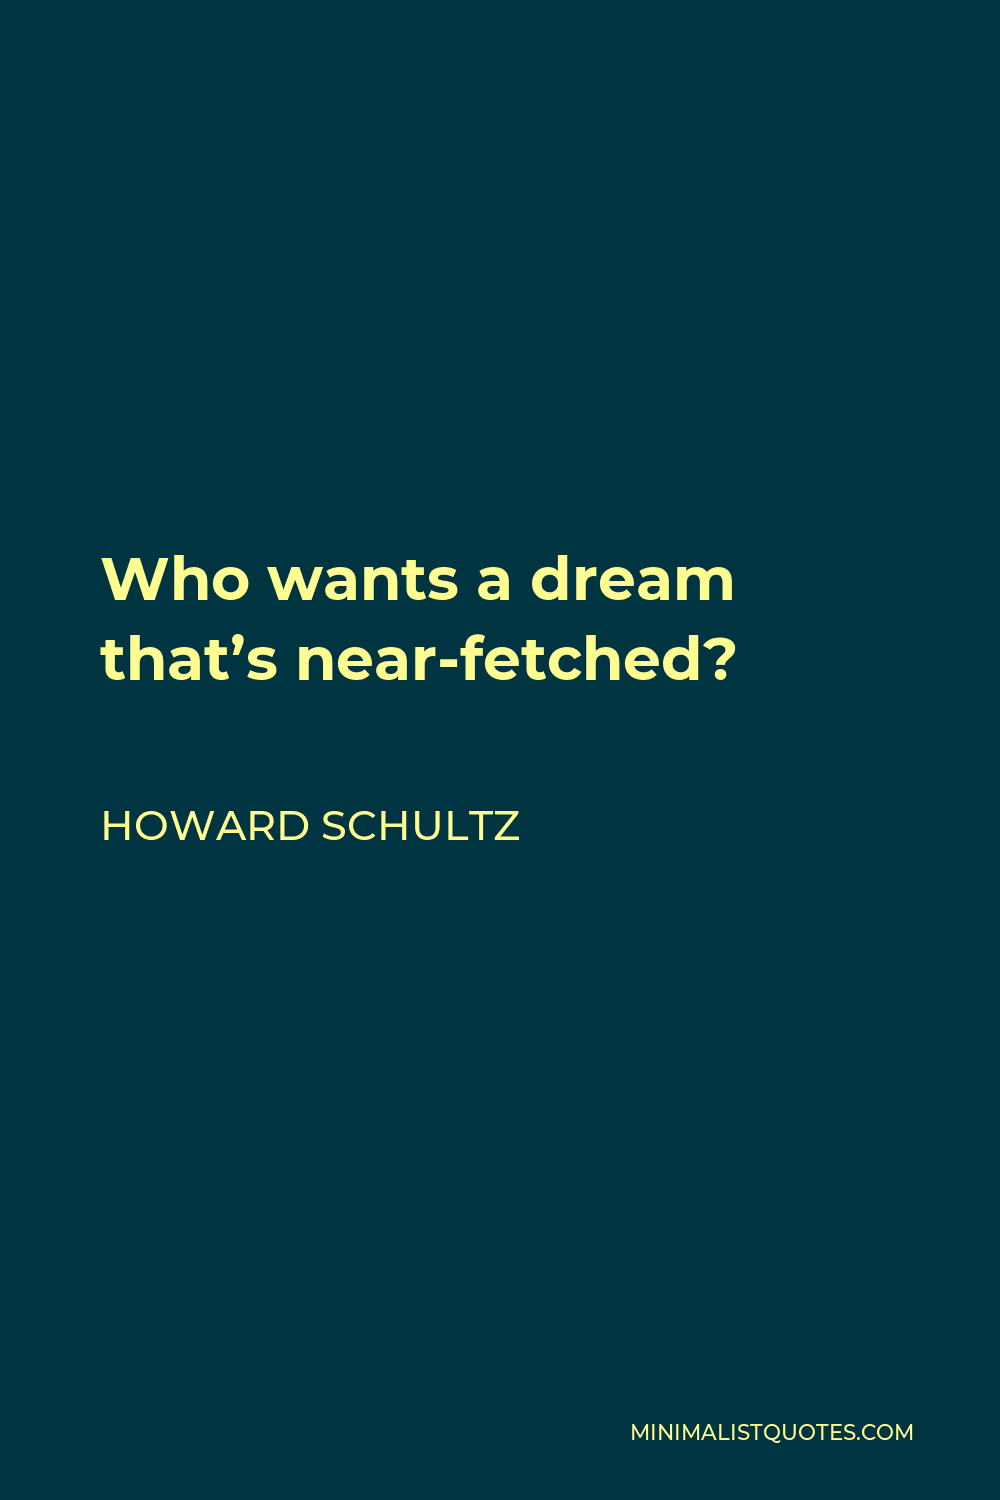 Howard Schultz Quote - Who wants a dream that’s near-fetched?